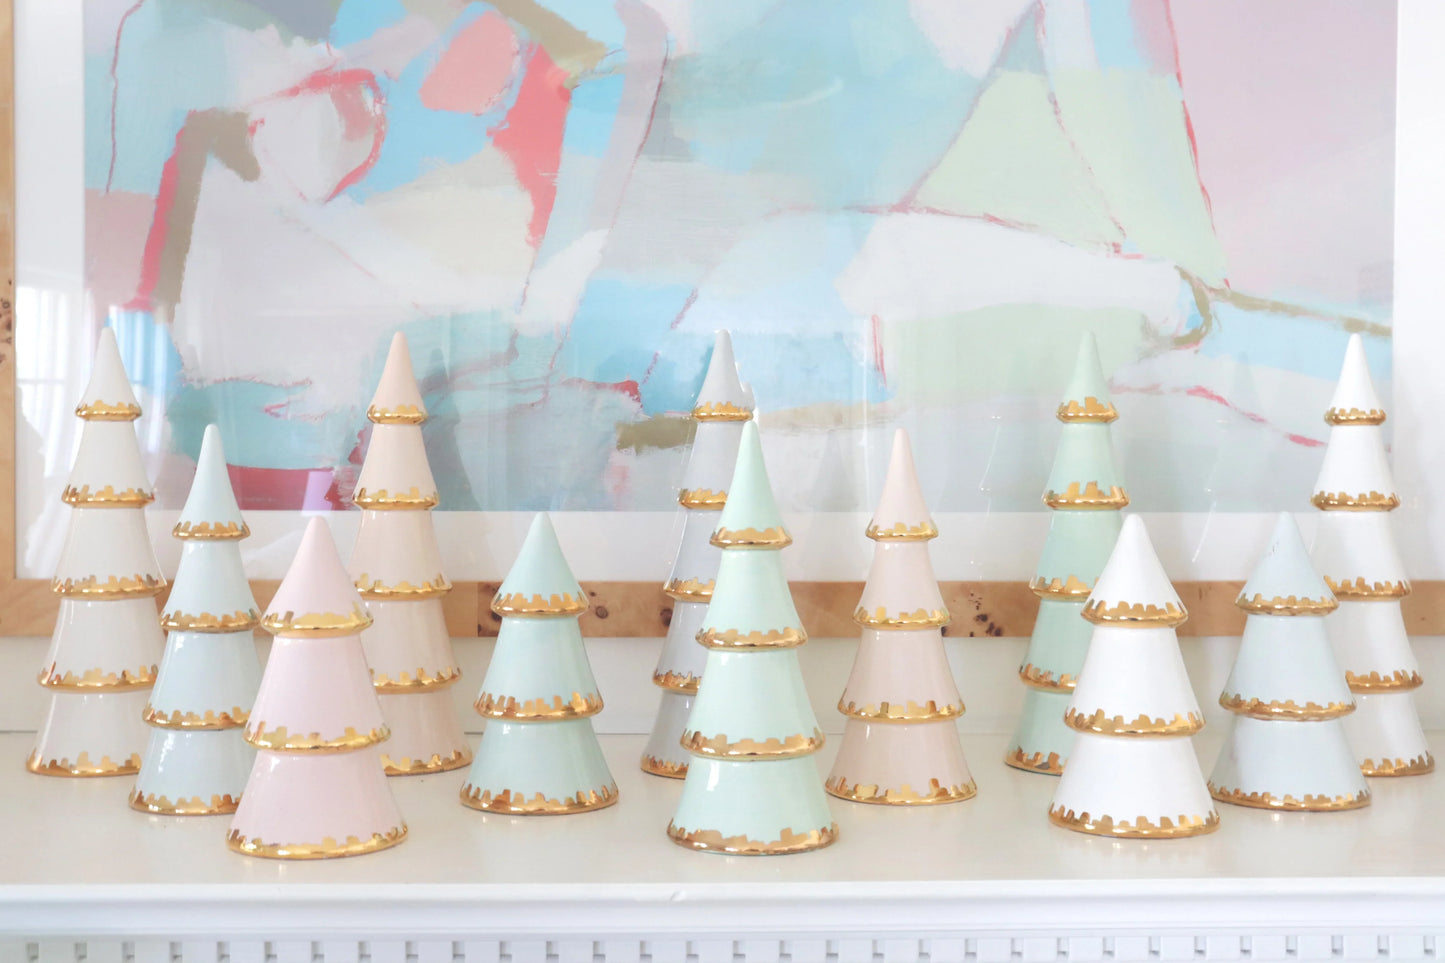 Aqua Christmas Trees with 22K Gold Brushstroke Accent | Wholesale